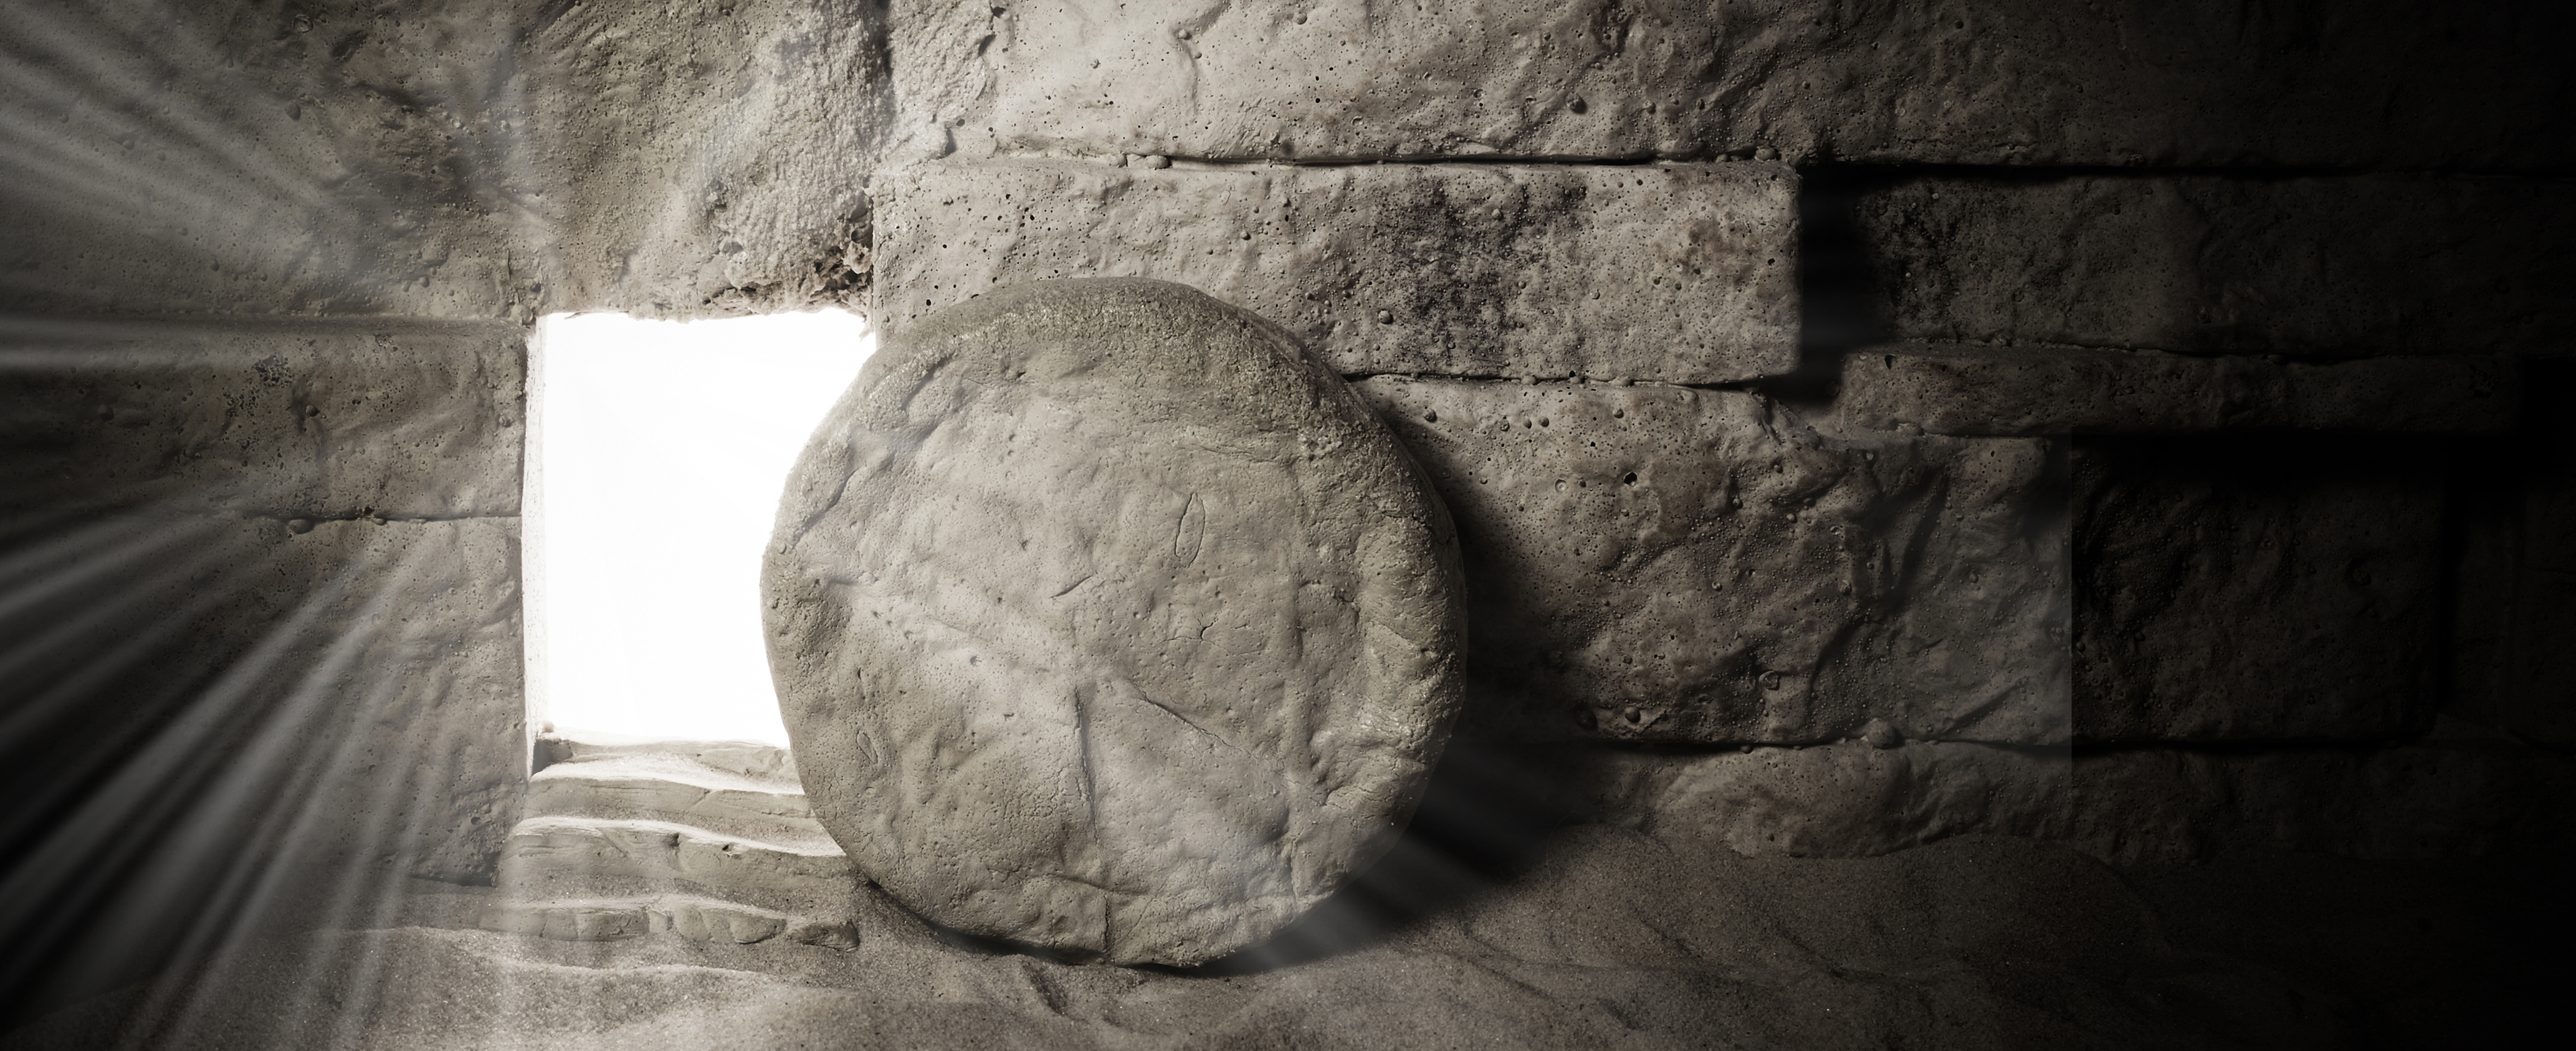 Opened Tomb With A Rock. Christian Easter Concept